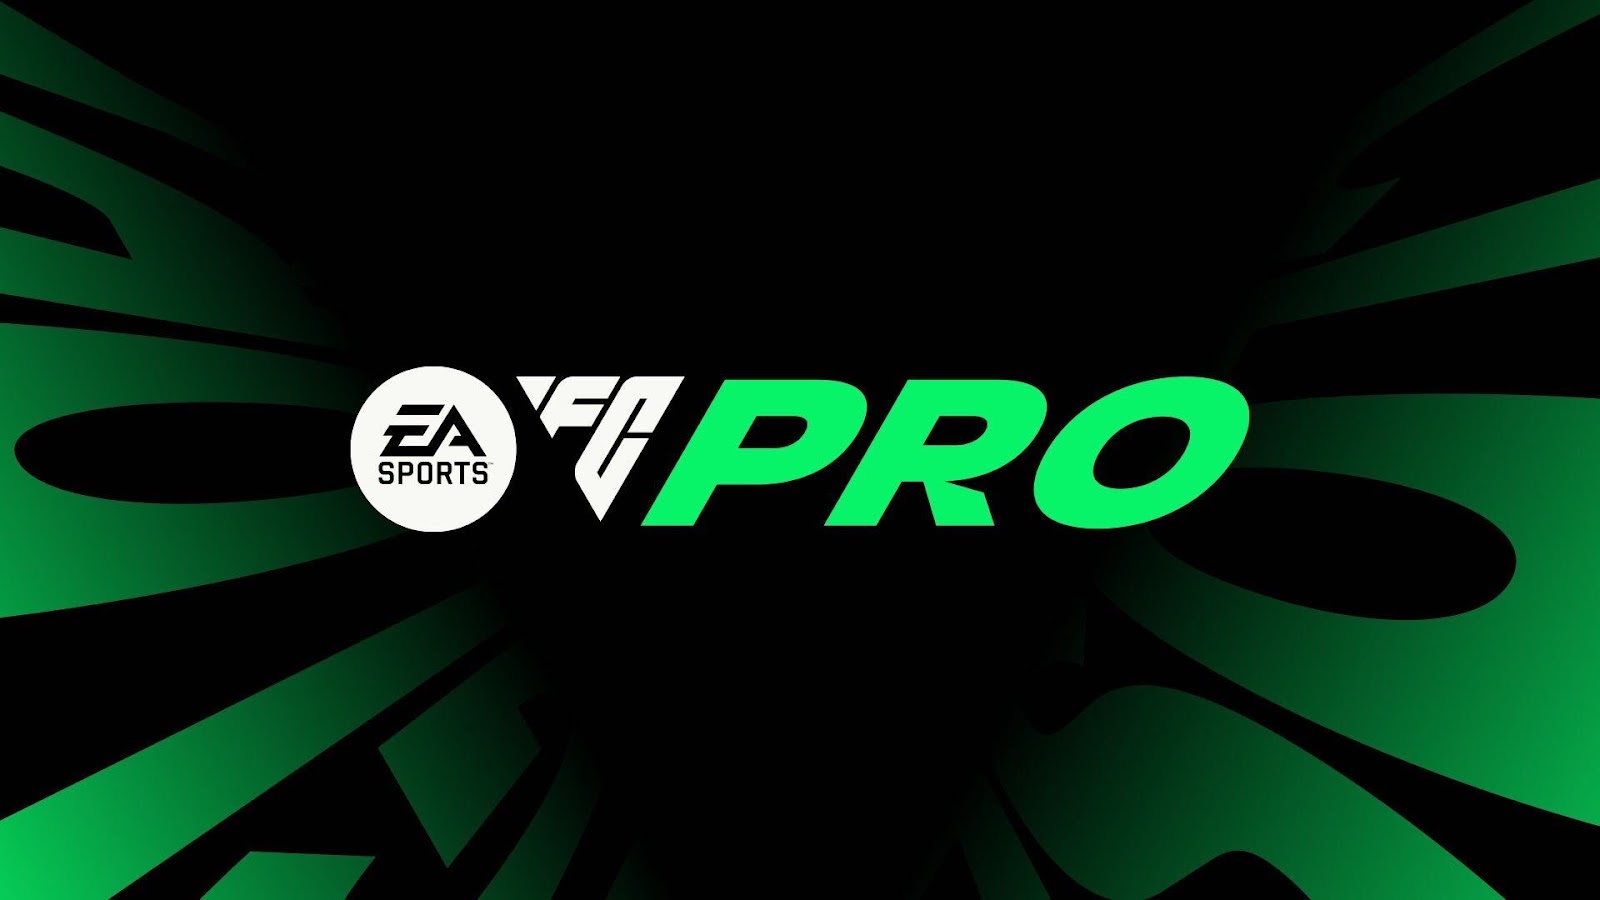 Our Customers: EA SPORTS